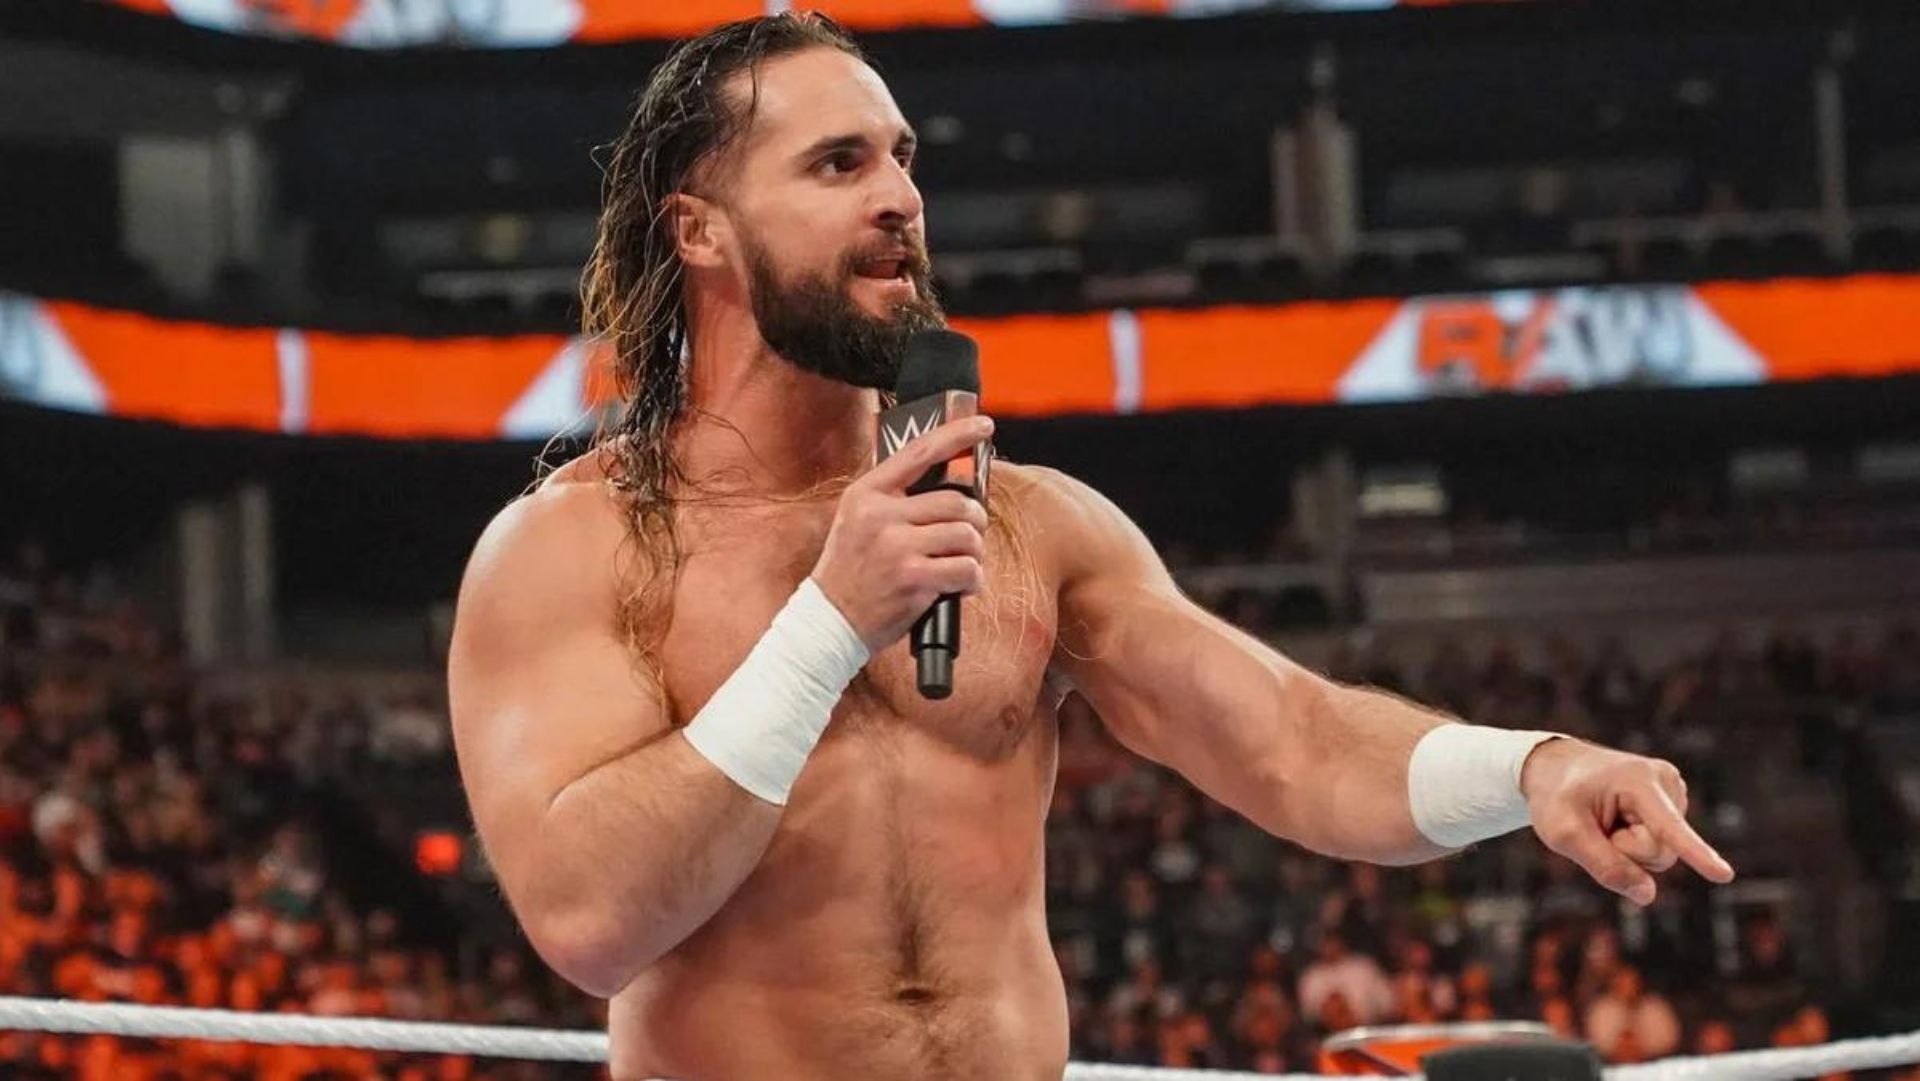 Seth Rollins defended his title against Damian Priest on WWE RAW.